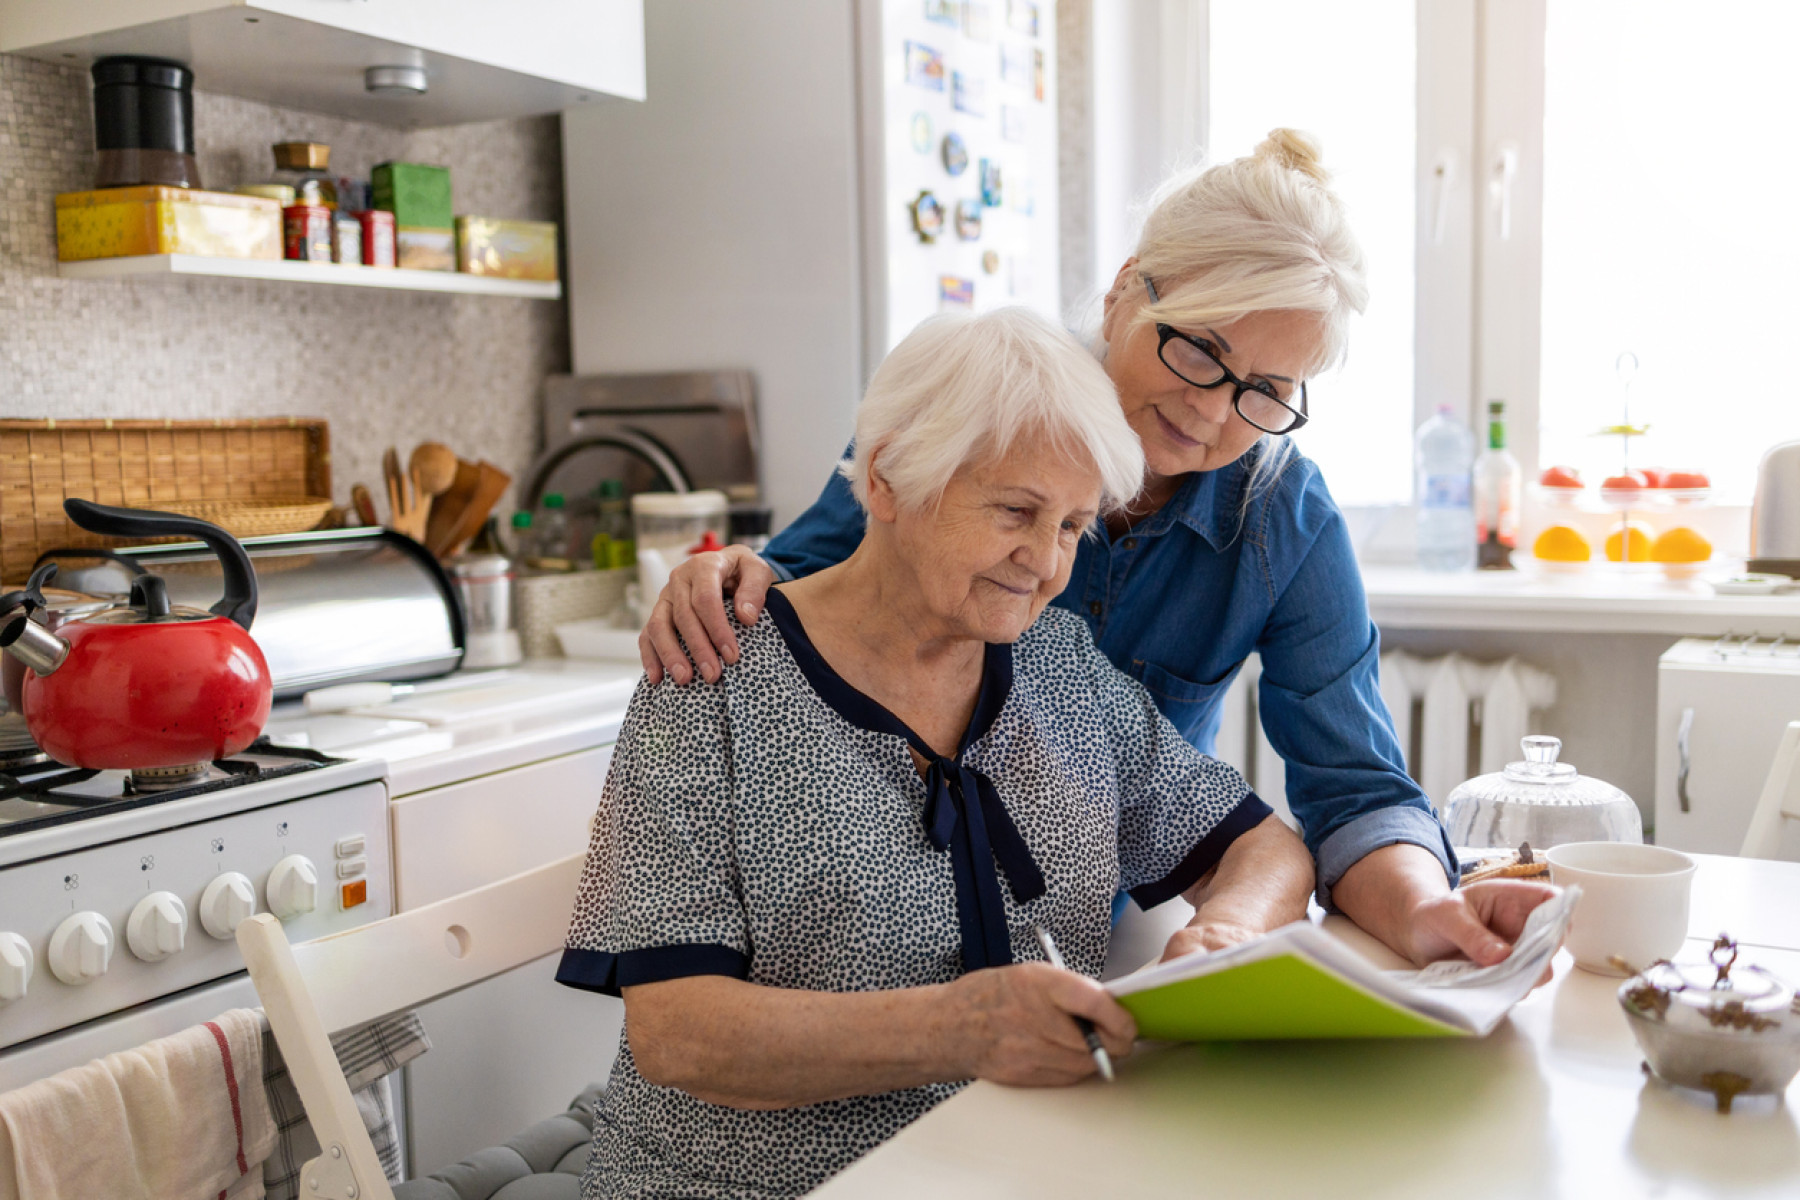 Two women applying for an home care package in their kitchen